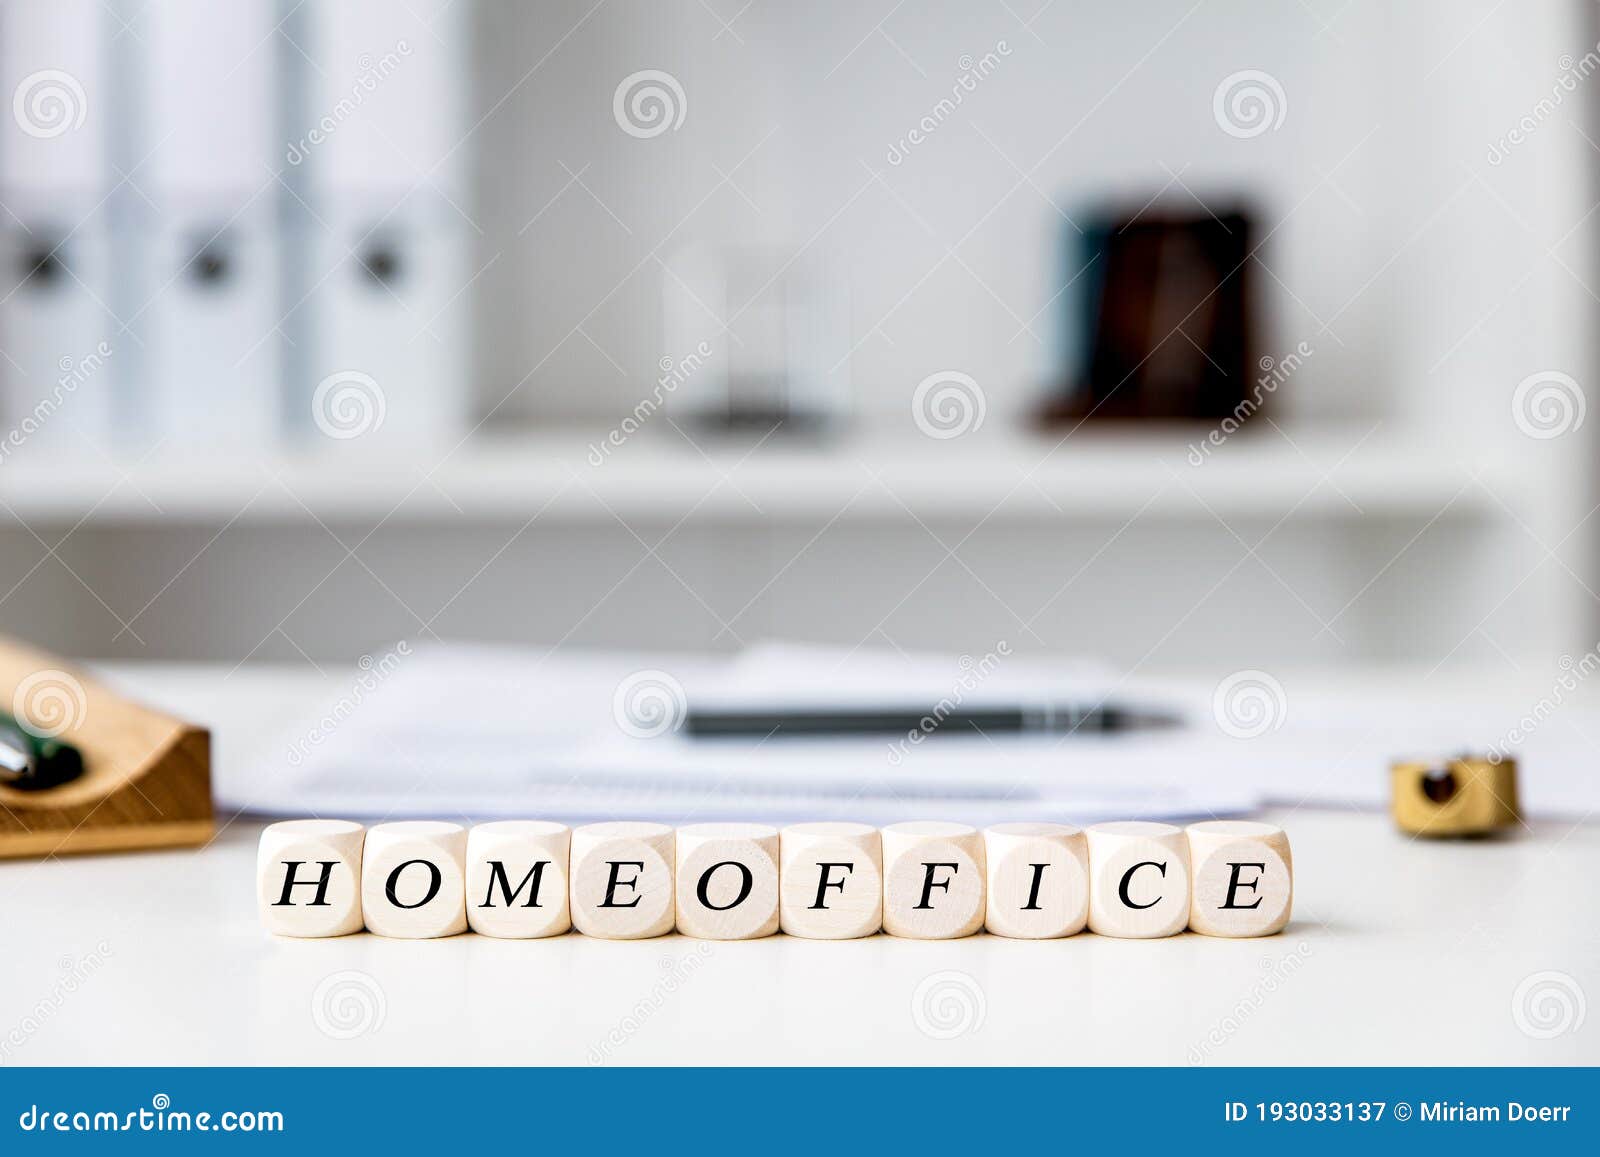 office at home workplace with dices, english word homeoffice